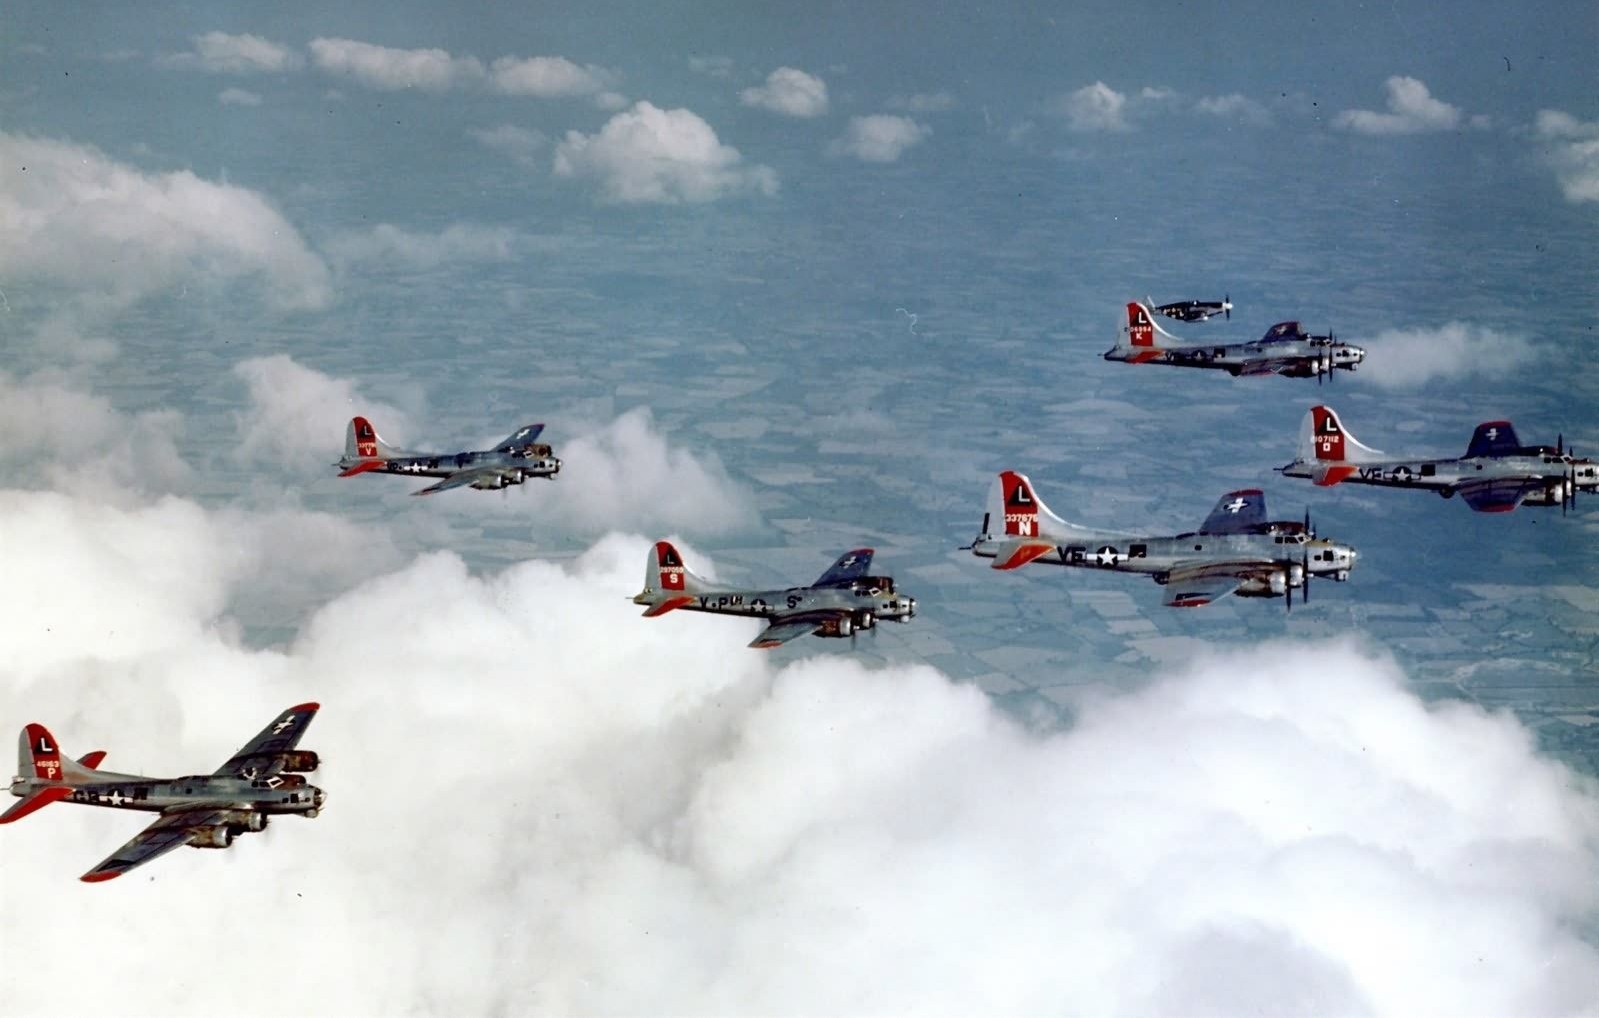 381st_Bomb_Group_B-17_formation_in_color_3~2.jpg